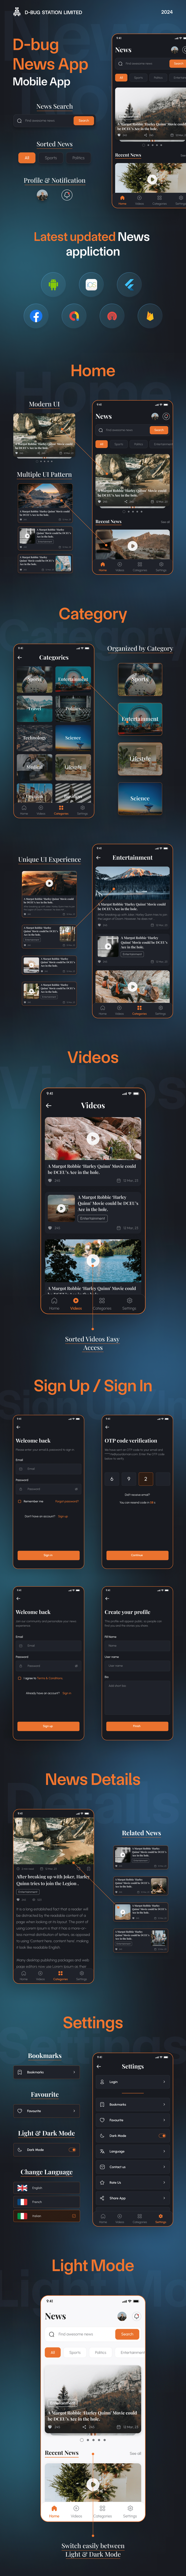 News App- Flutter News App for Android and IOS - 4